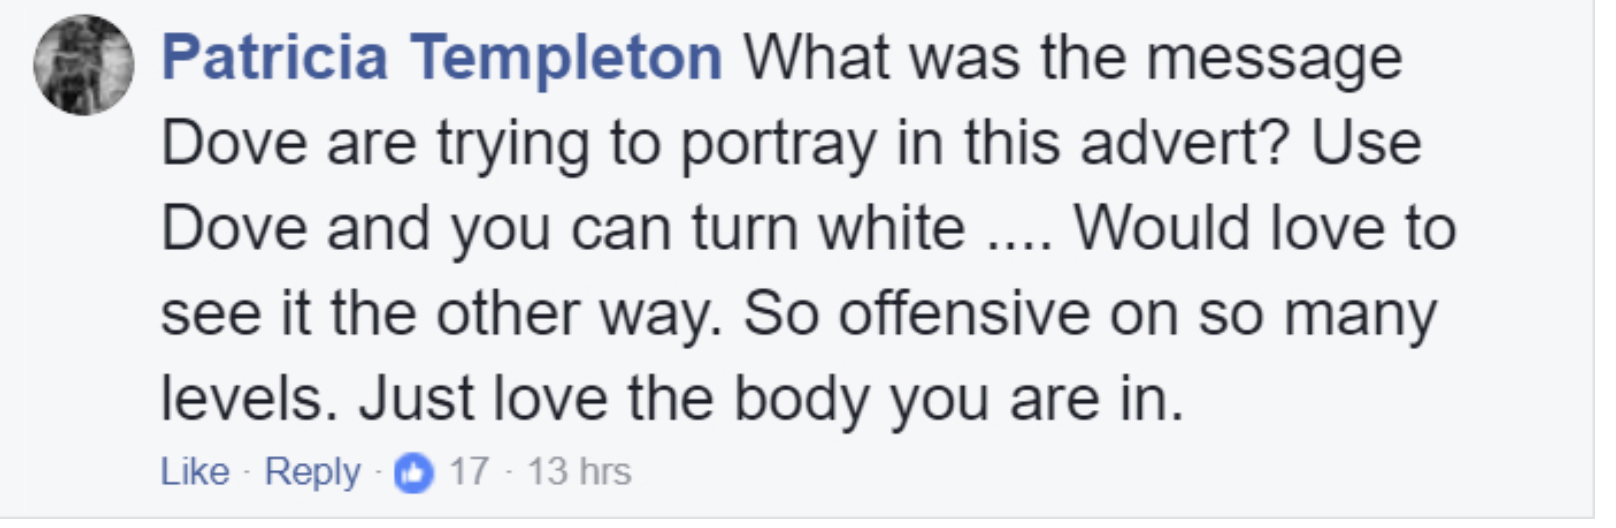 Image of tweet from Patricia Templeton declaring Dove racist